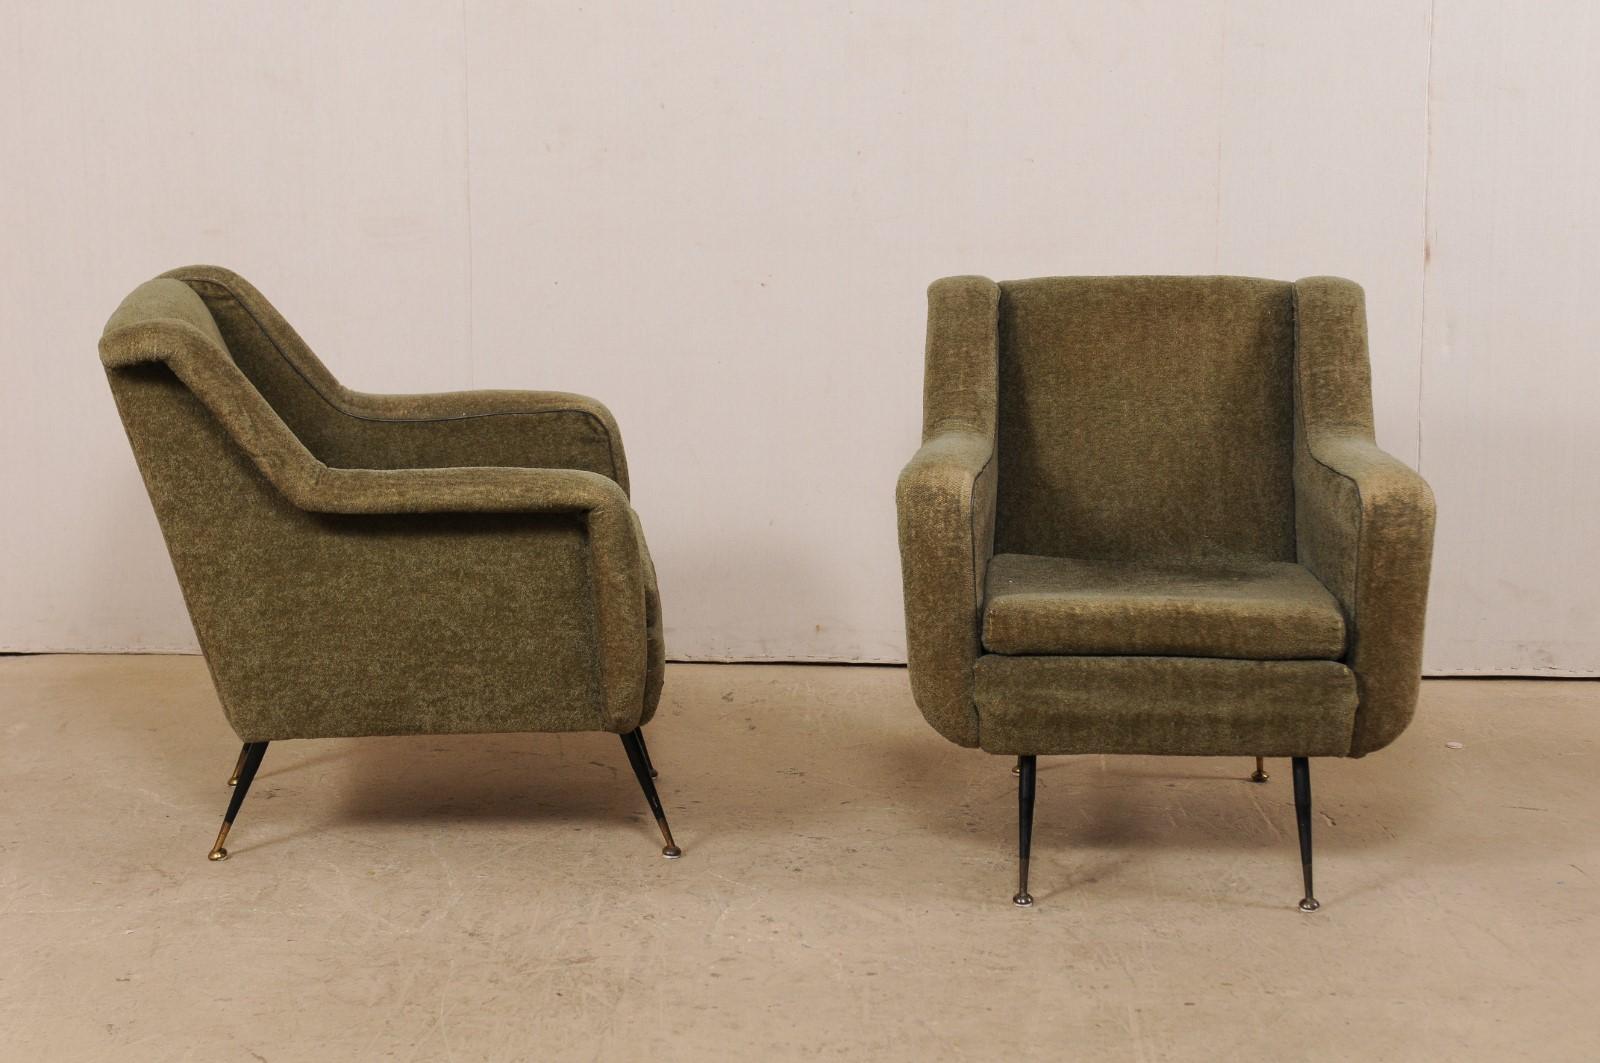 20th Century Pair of Mid-Century Modern Upholstered Club Chairs from Italy with Iron Legs